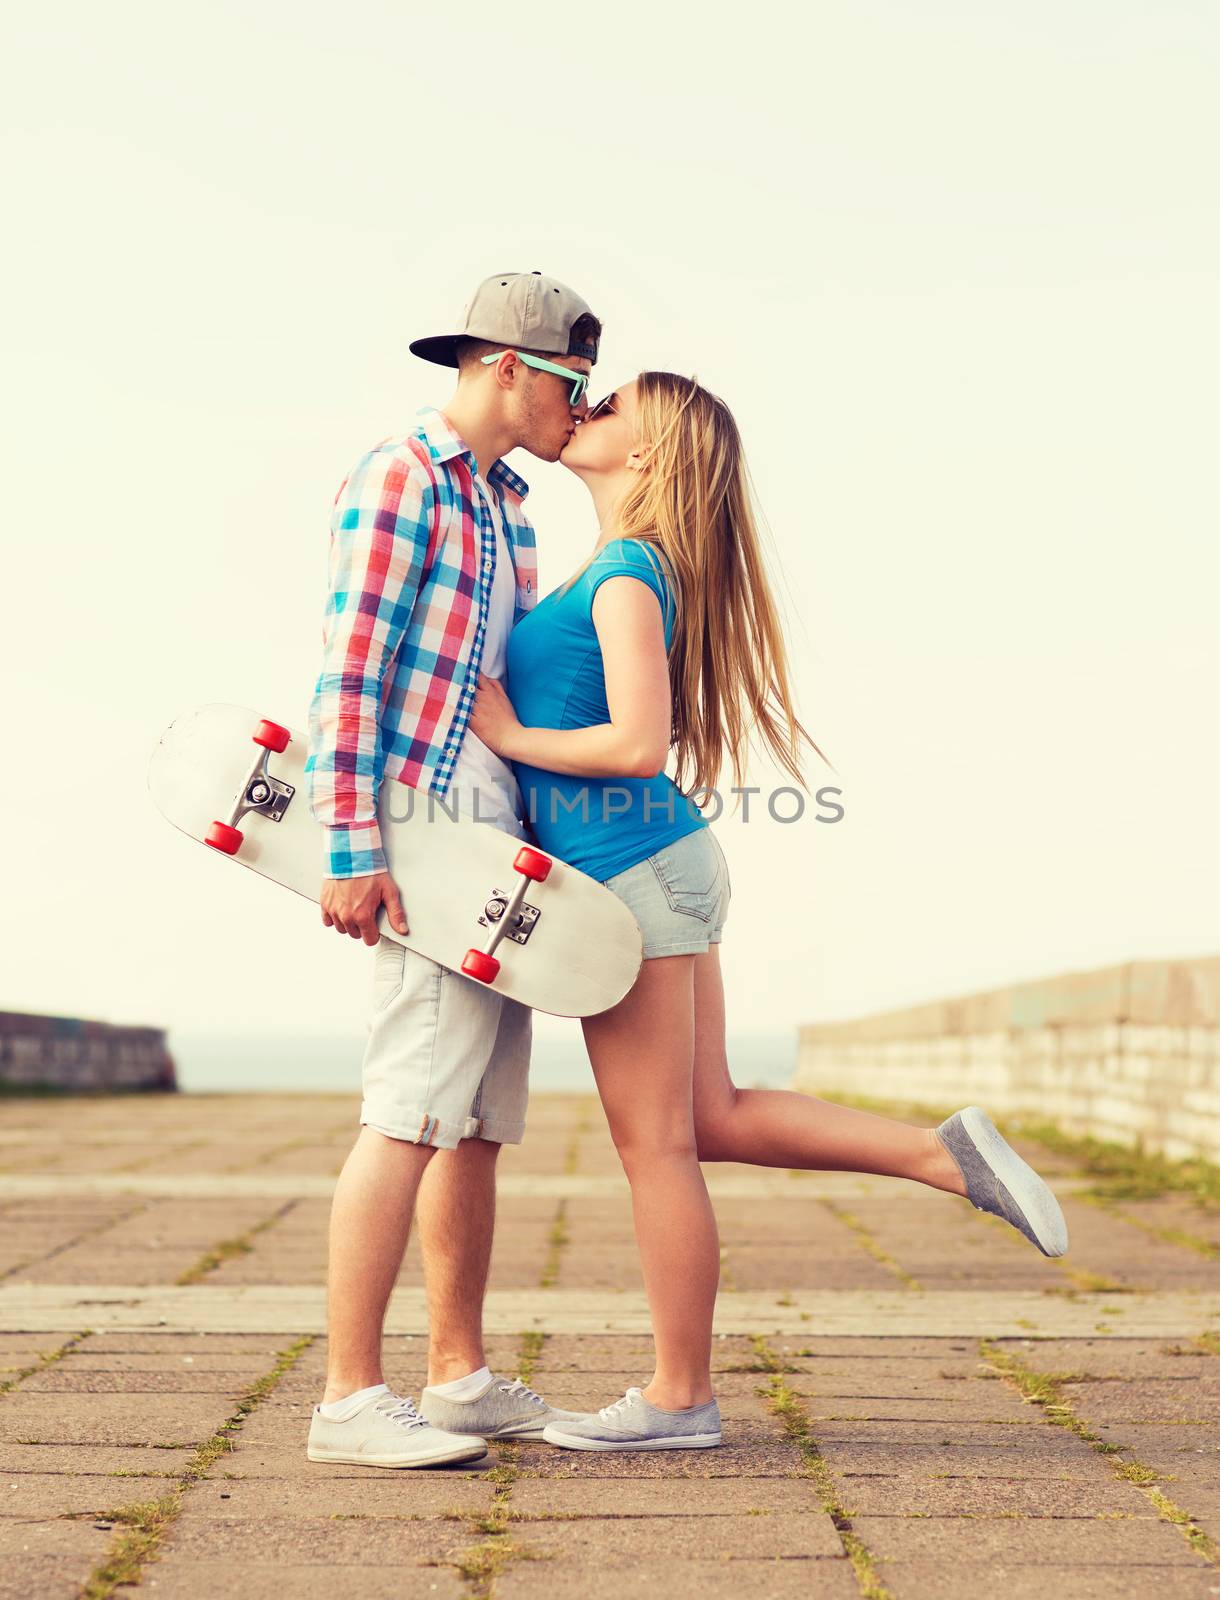 smiling couple with skateboard kissing outdoors by dolgachov